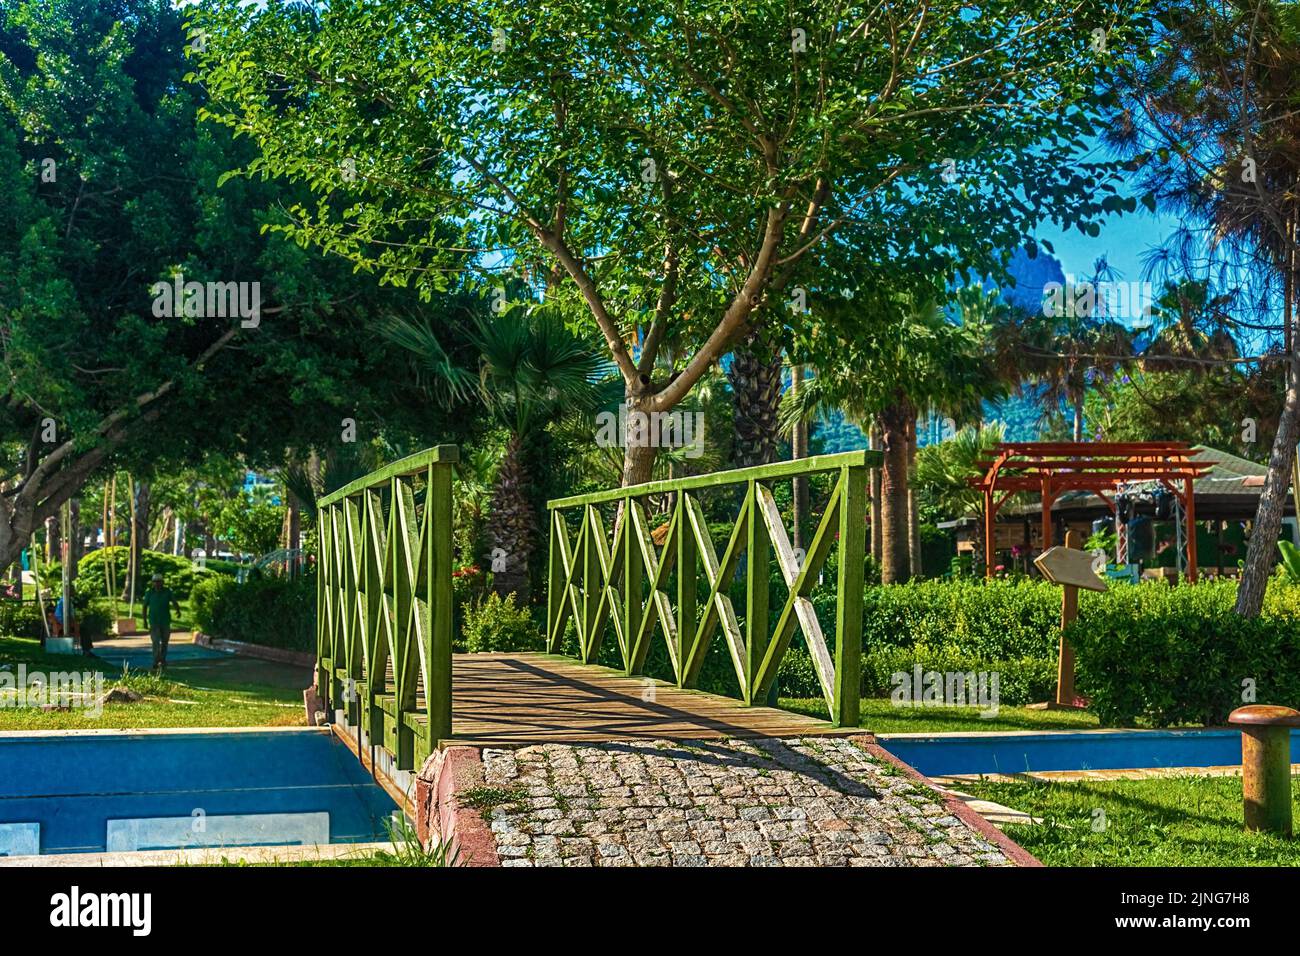 Beautiful summer landscape. View of the path and the bridge in a green garden with green trees along the embankment in Kemer, Turkey. In the backgroun Stock Photo